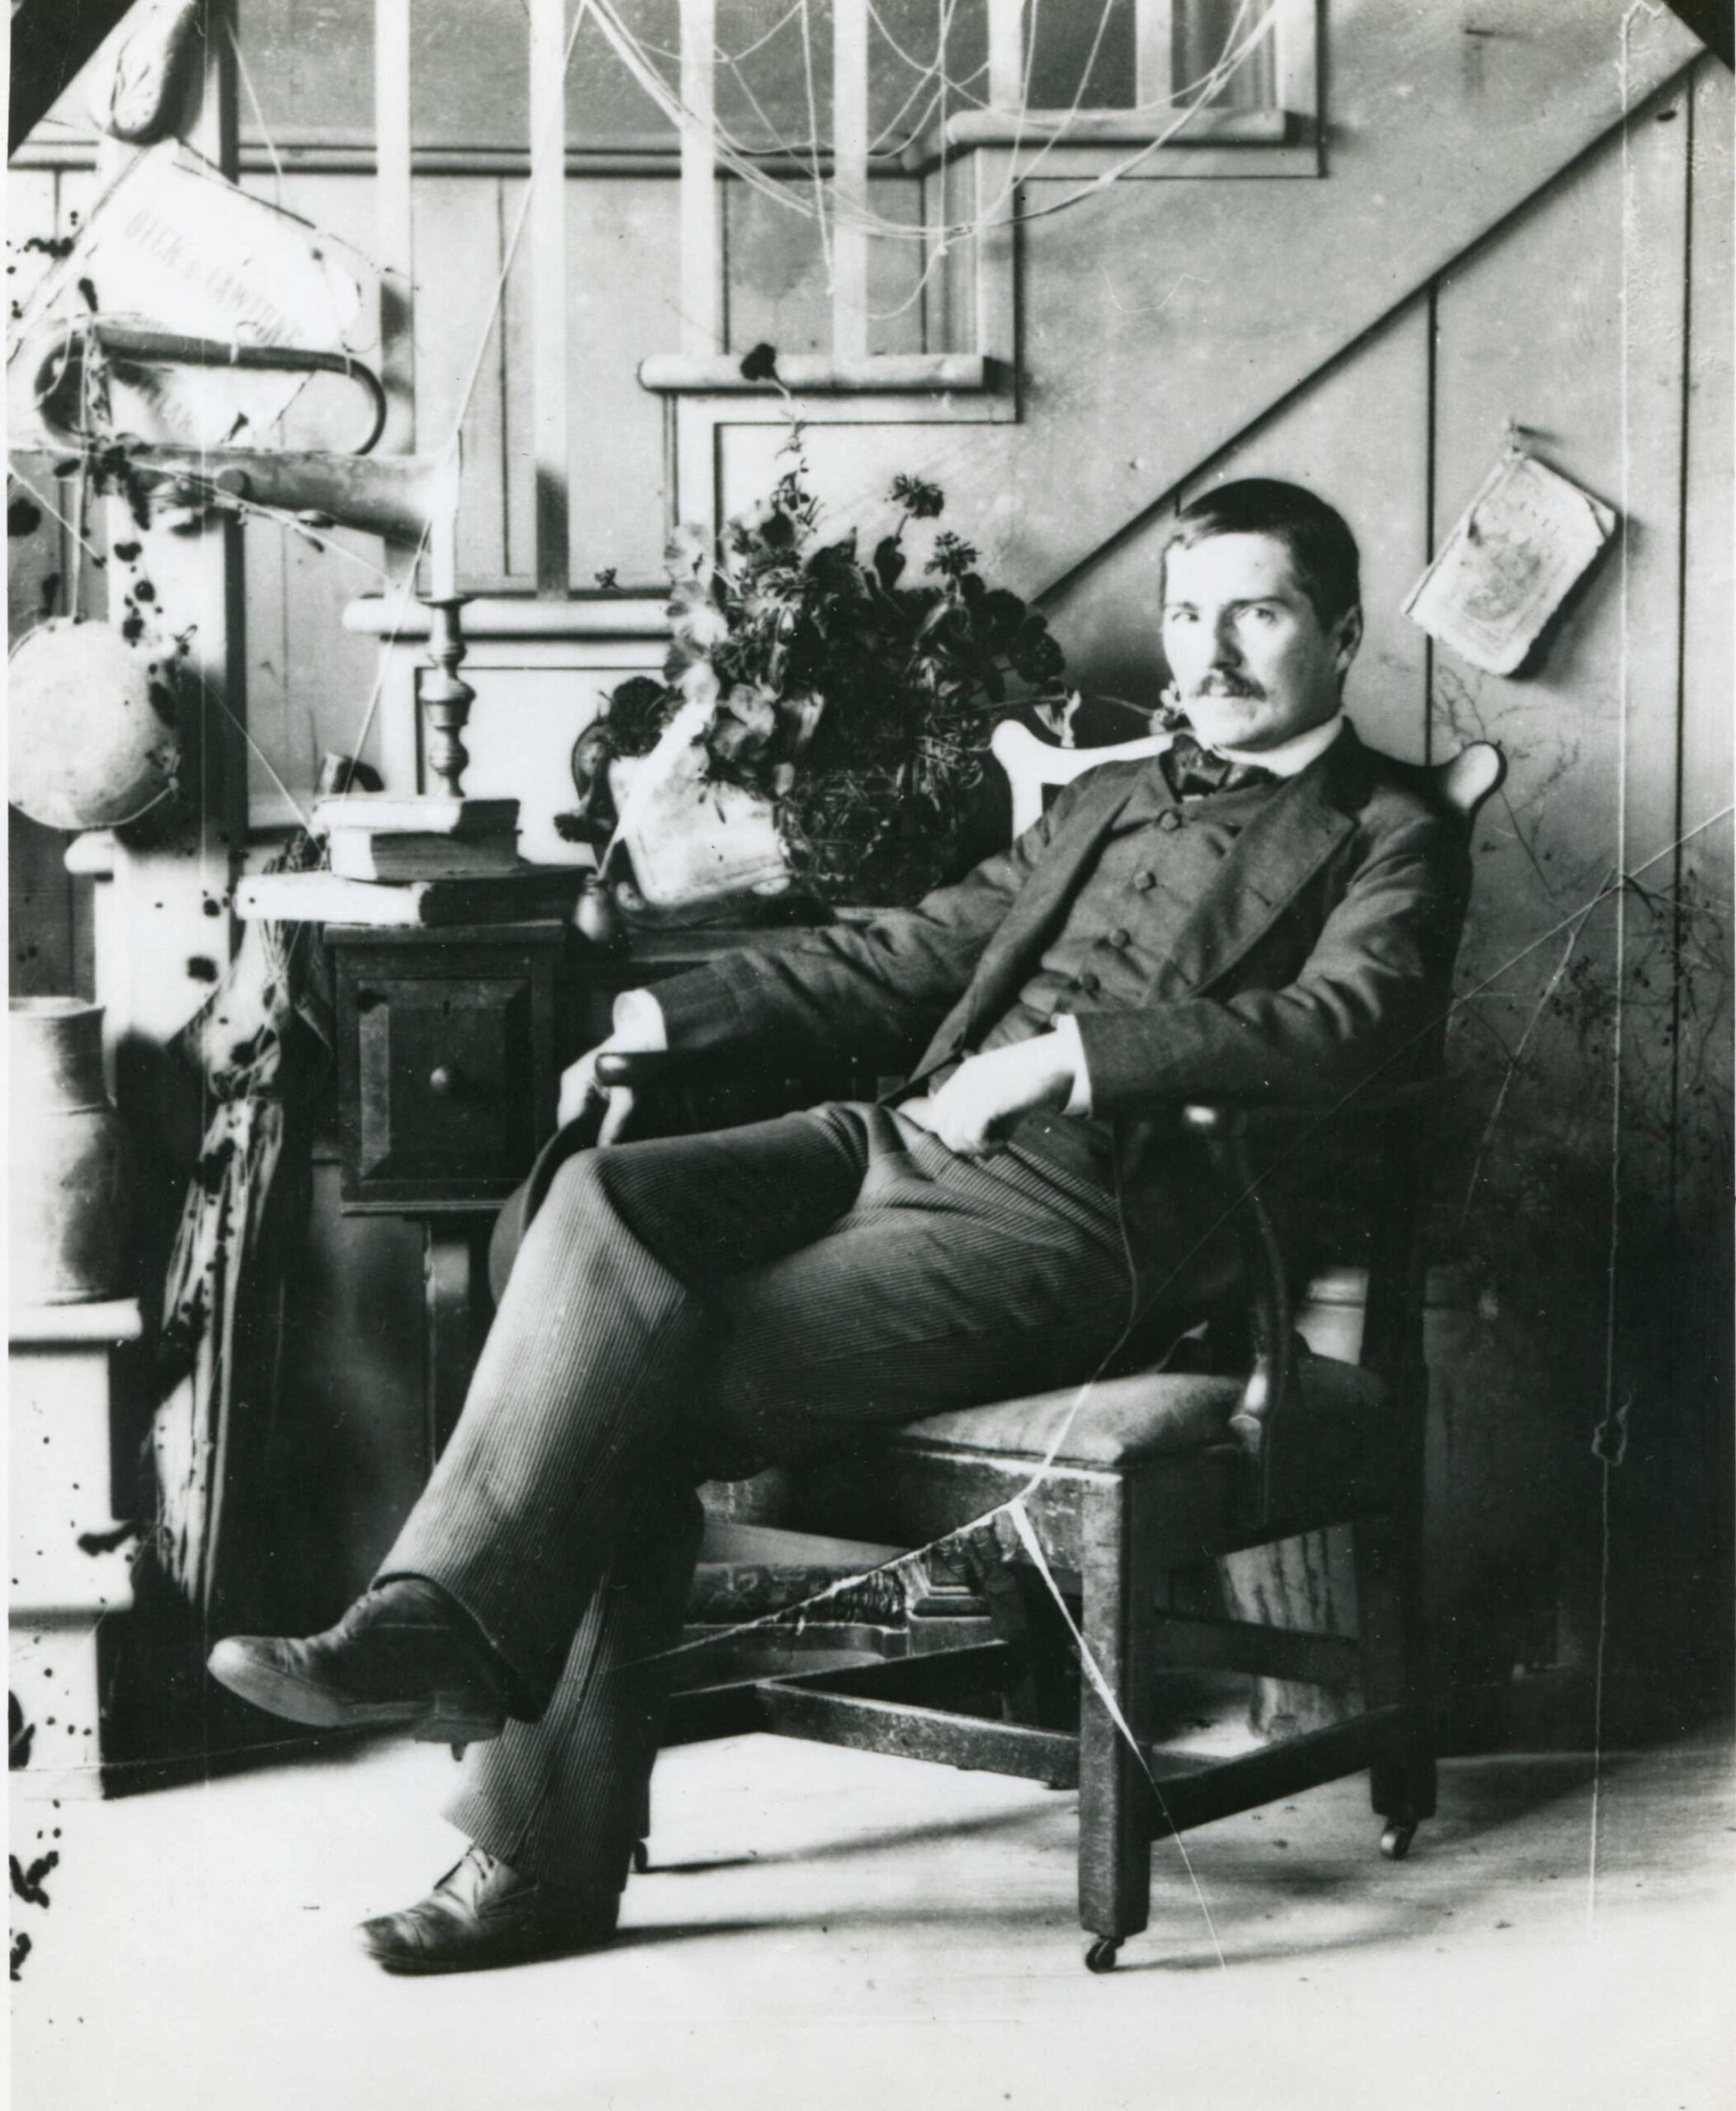 The museum owns this photograph of Peto seated in his studio, c. 1890.